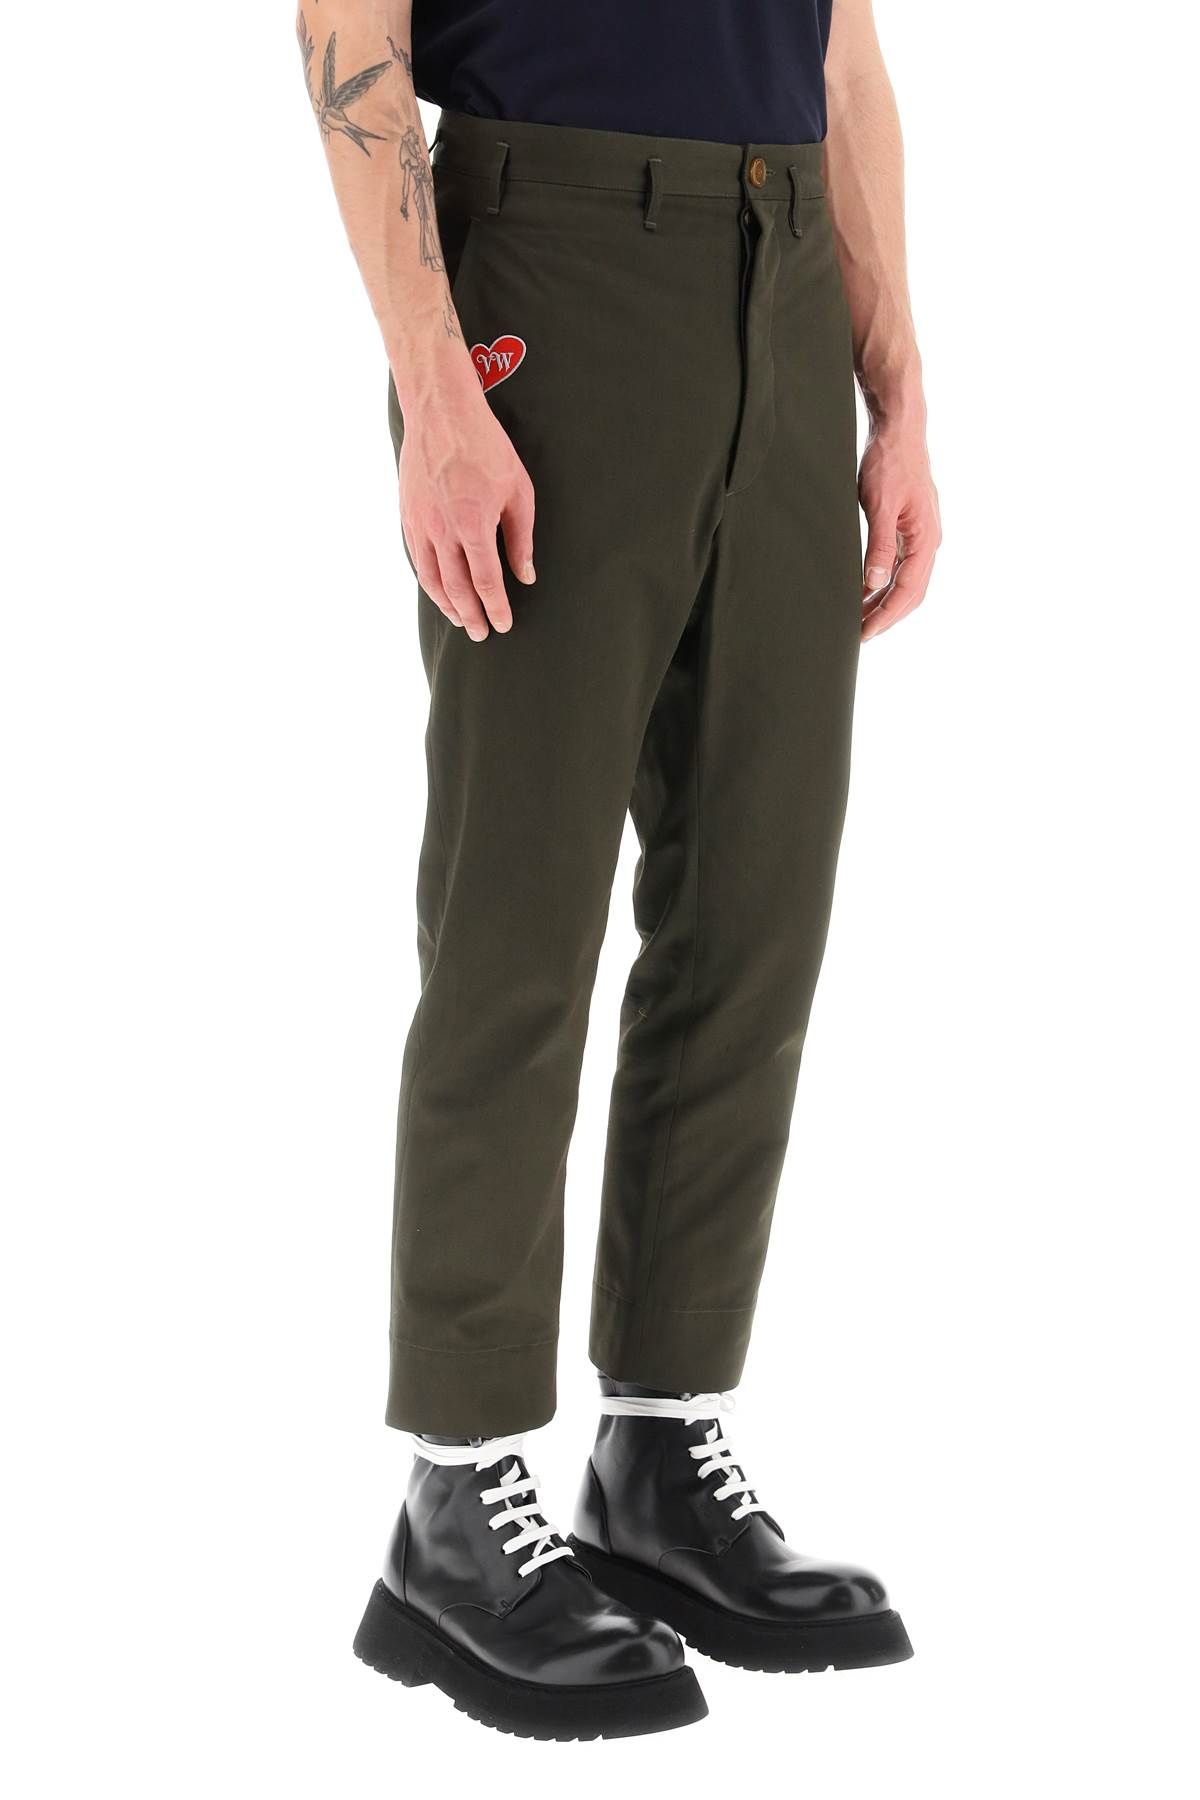 Shop Vivienne Westwood Cropped Cruise Pants Featuring Embroidered Heart-shaped Logo In Green